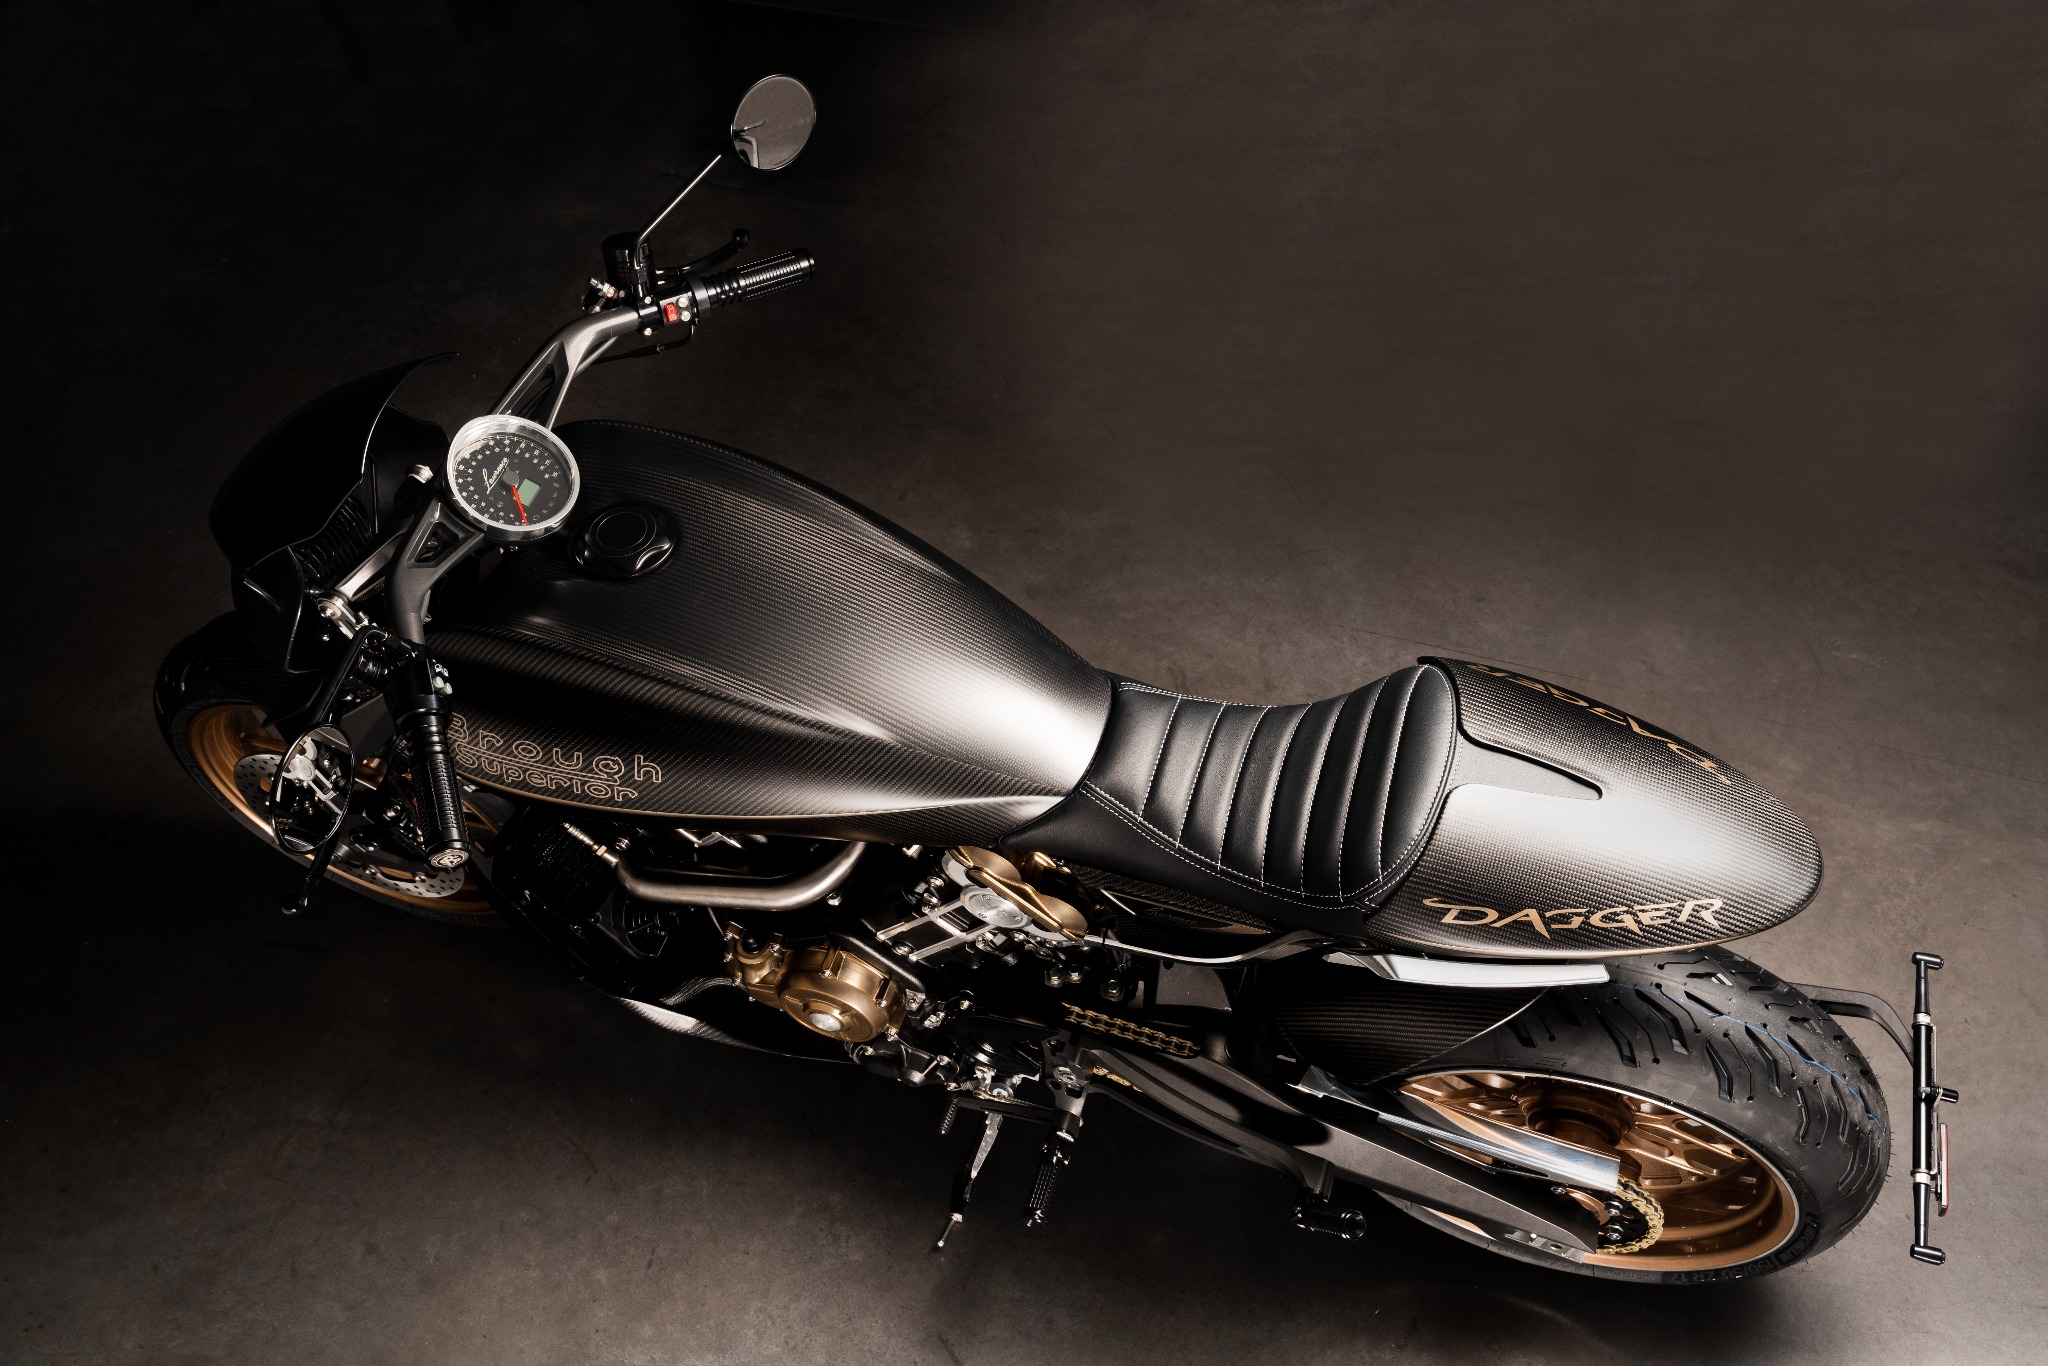 Boxer Design Brough Superior Lawrence Dagger motorcycle